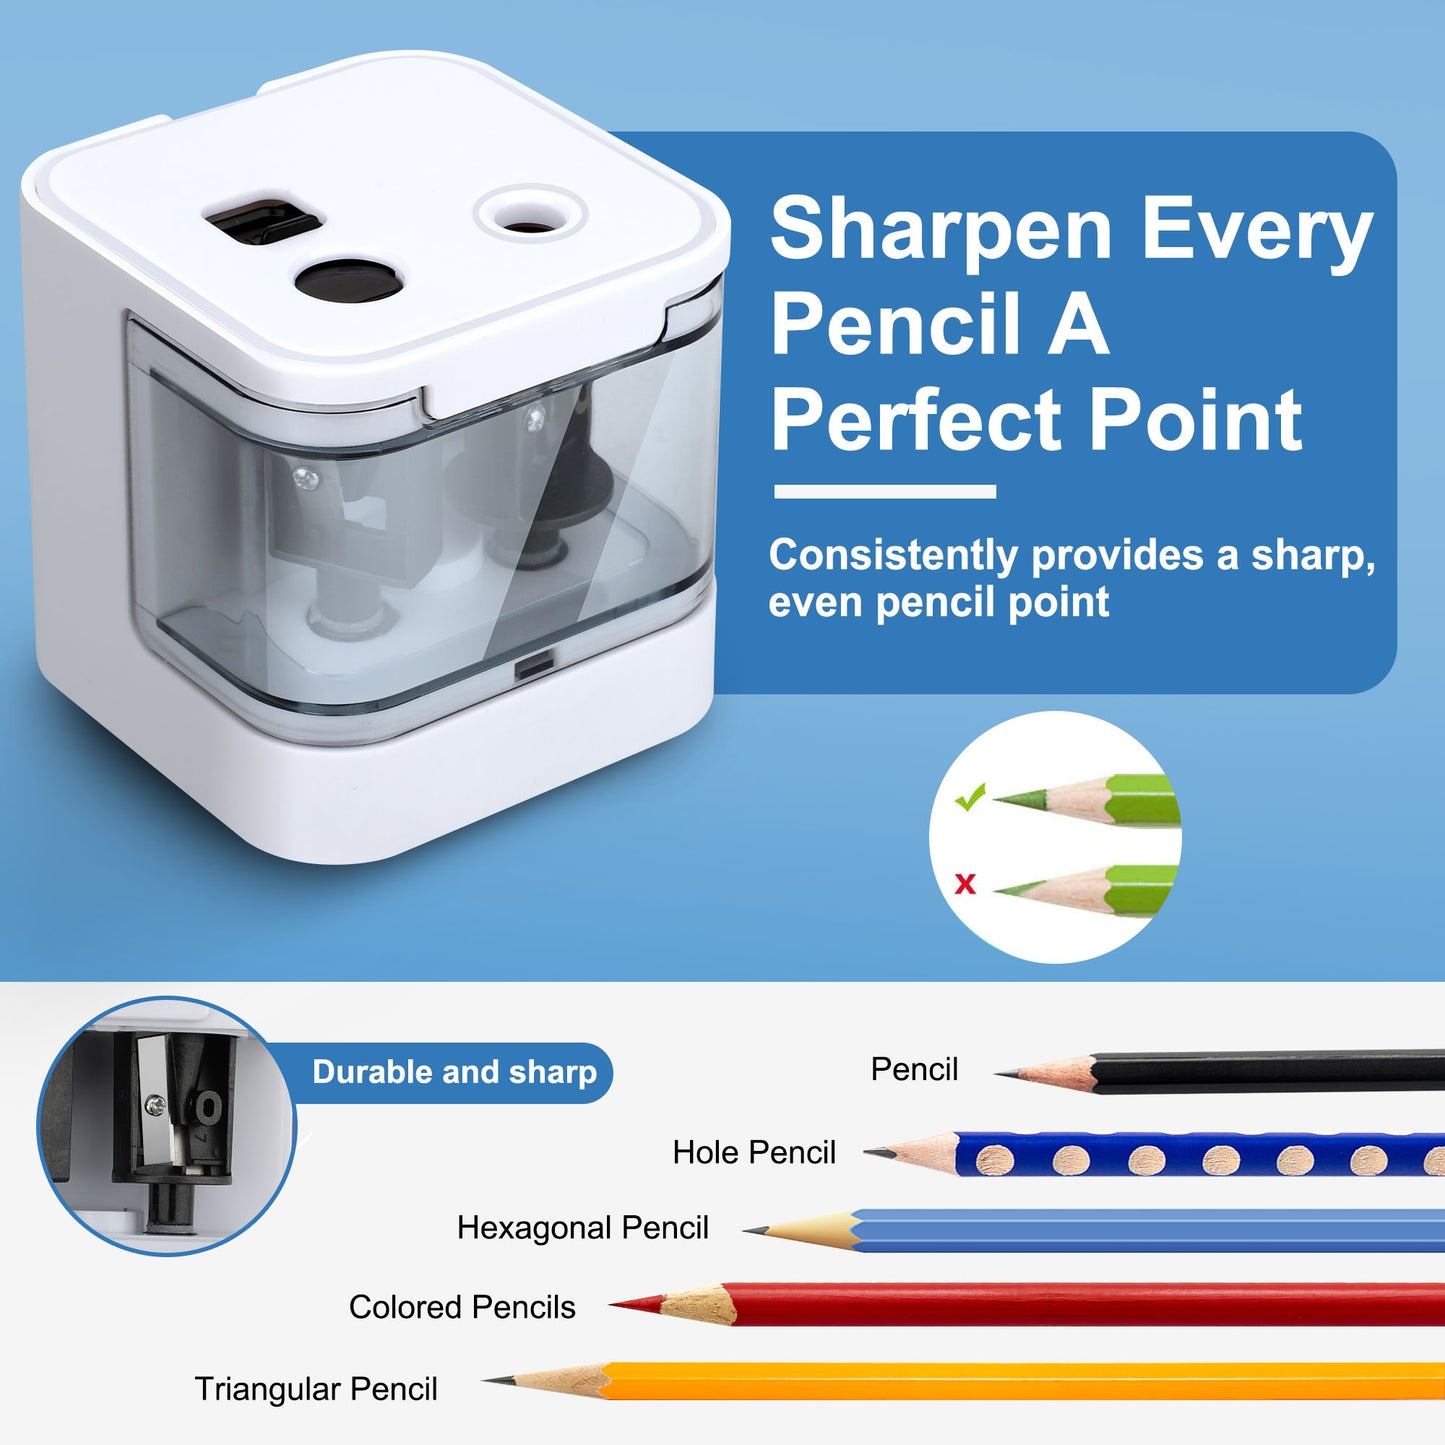 Electric Pencil Sharpener - Battery-Operated, Dual Hole Design